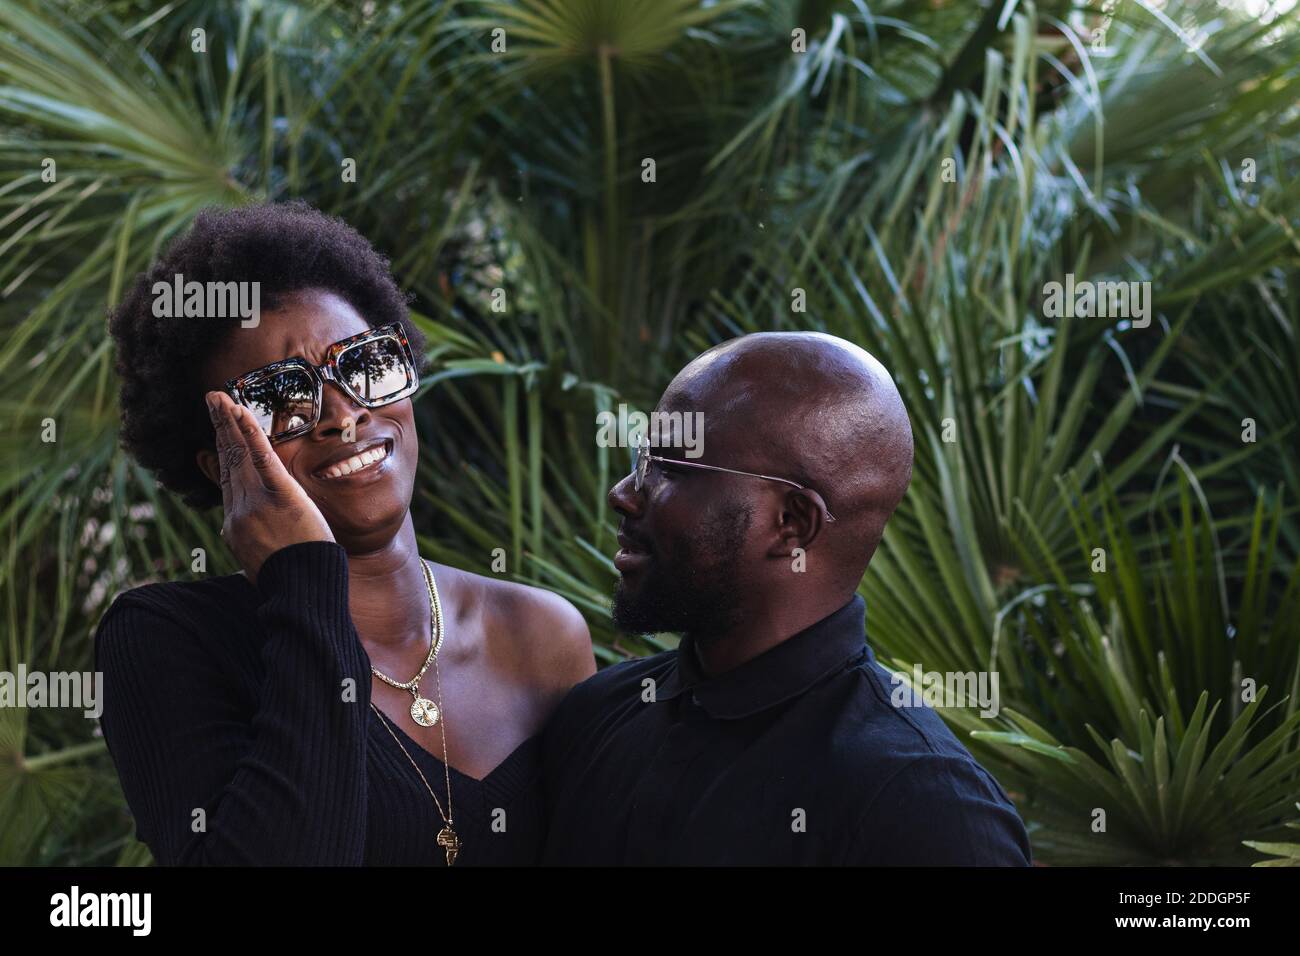 Puzzled African American female in sunglasses embracing boyfriend while resting together among green palms Stock Photo